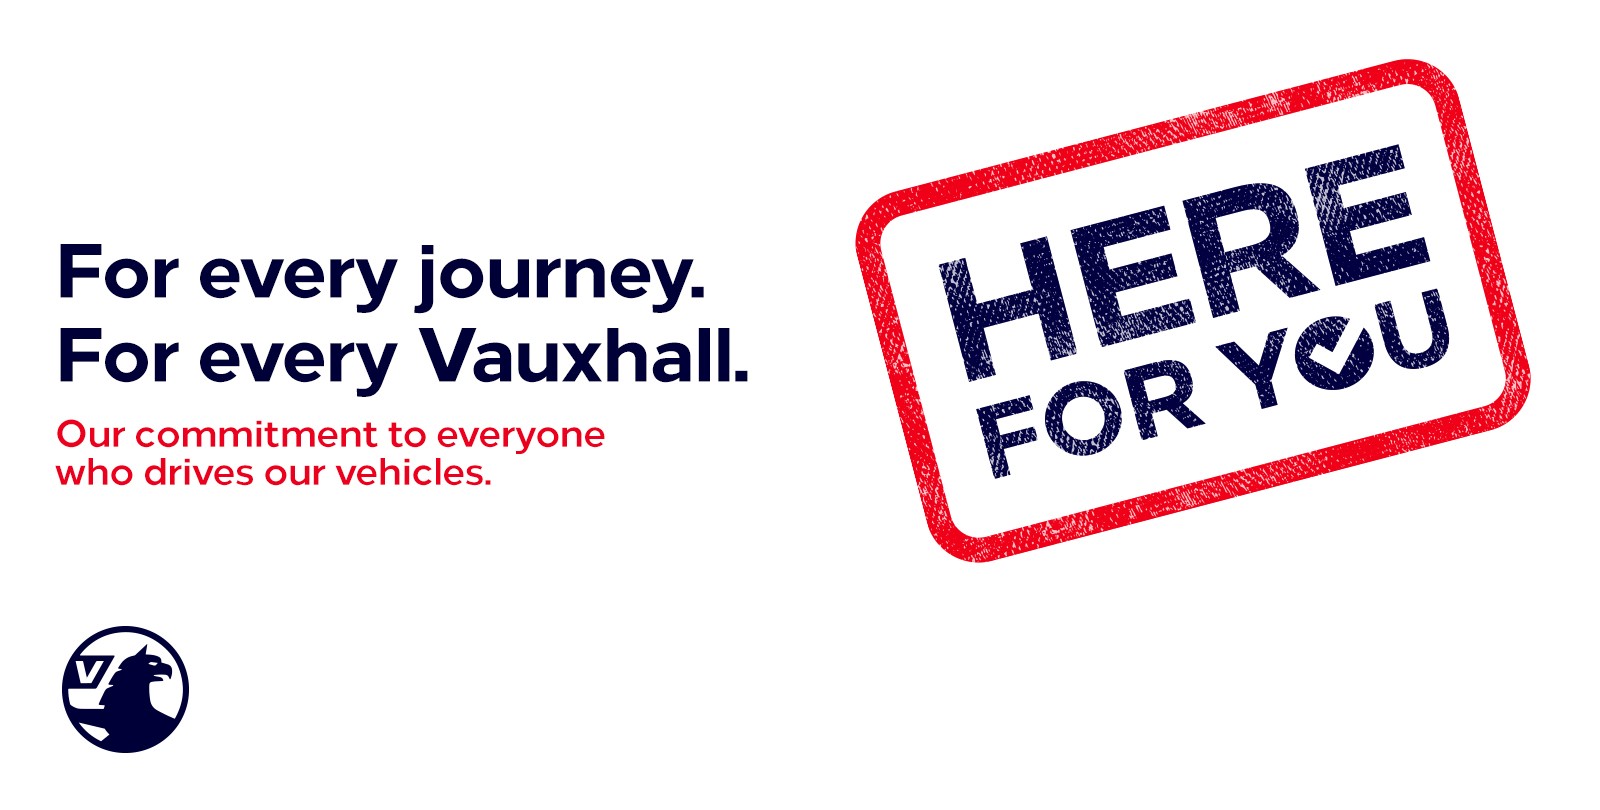 Vauxhall Here for you